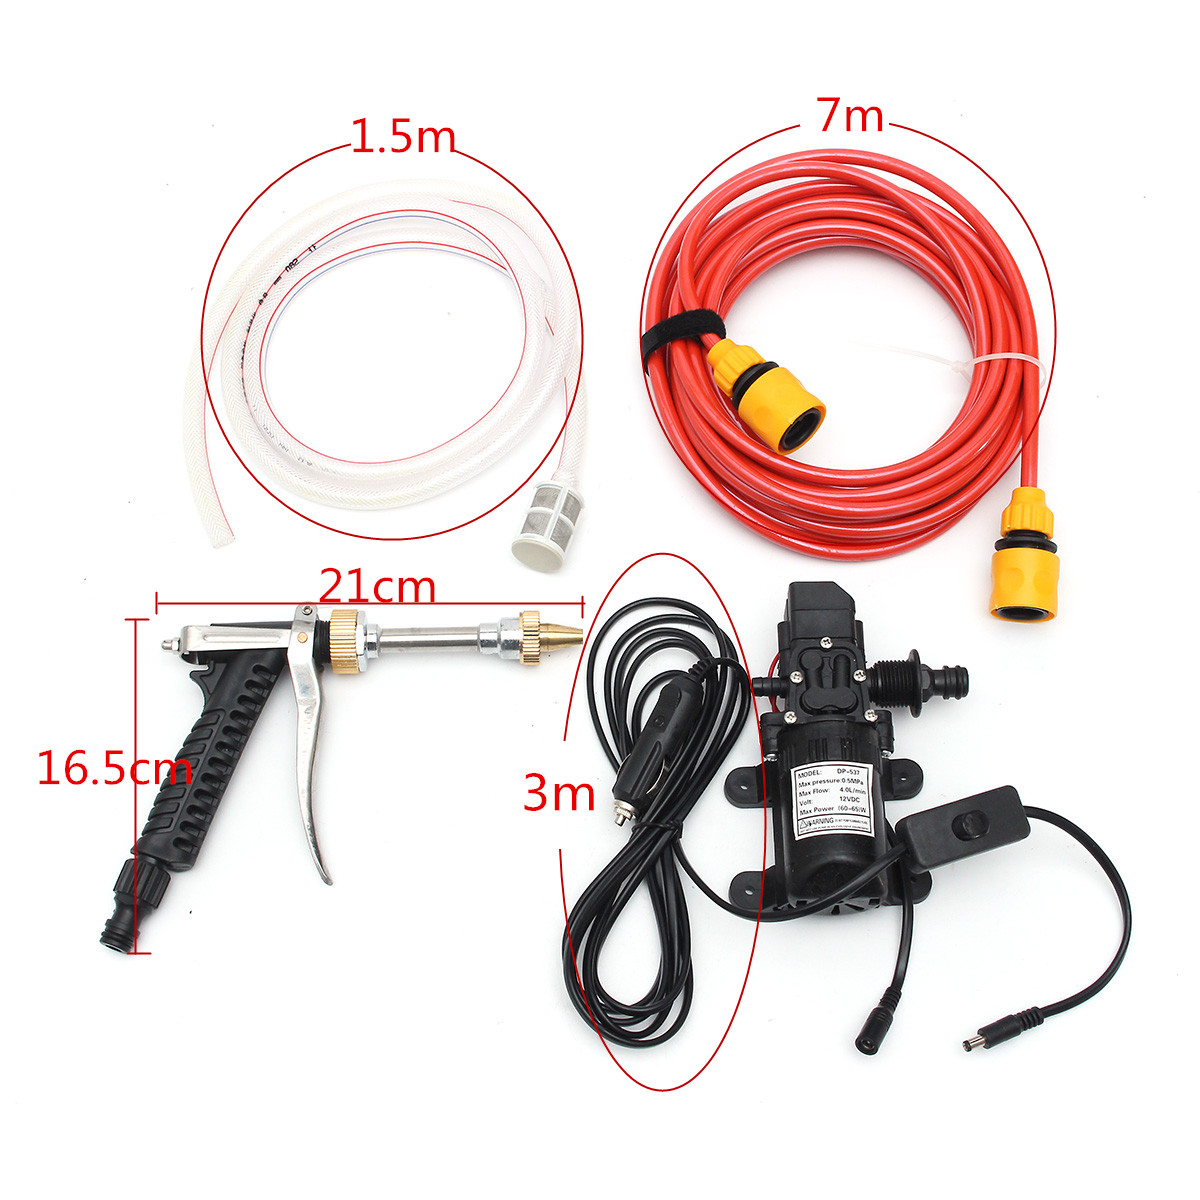 12V-60W-Electric-Car-Wash-Pump-Water-Cleaner-Washer-Pressure-Sprayer-Tool-Kit-1134729